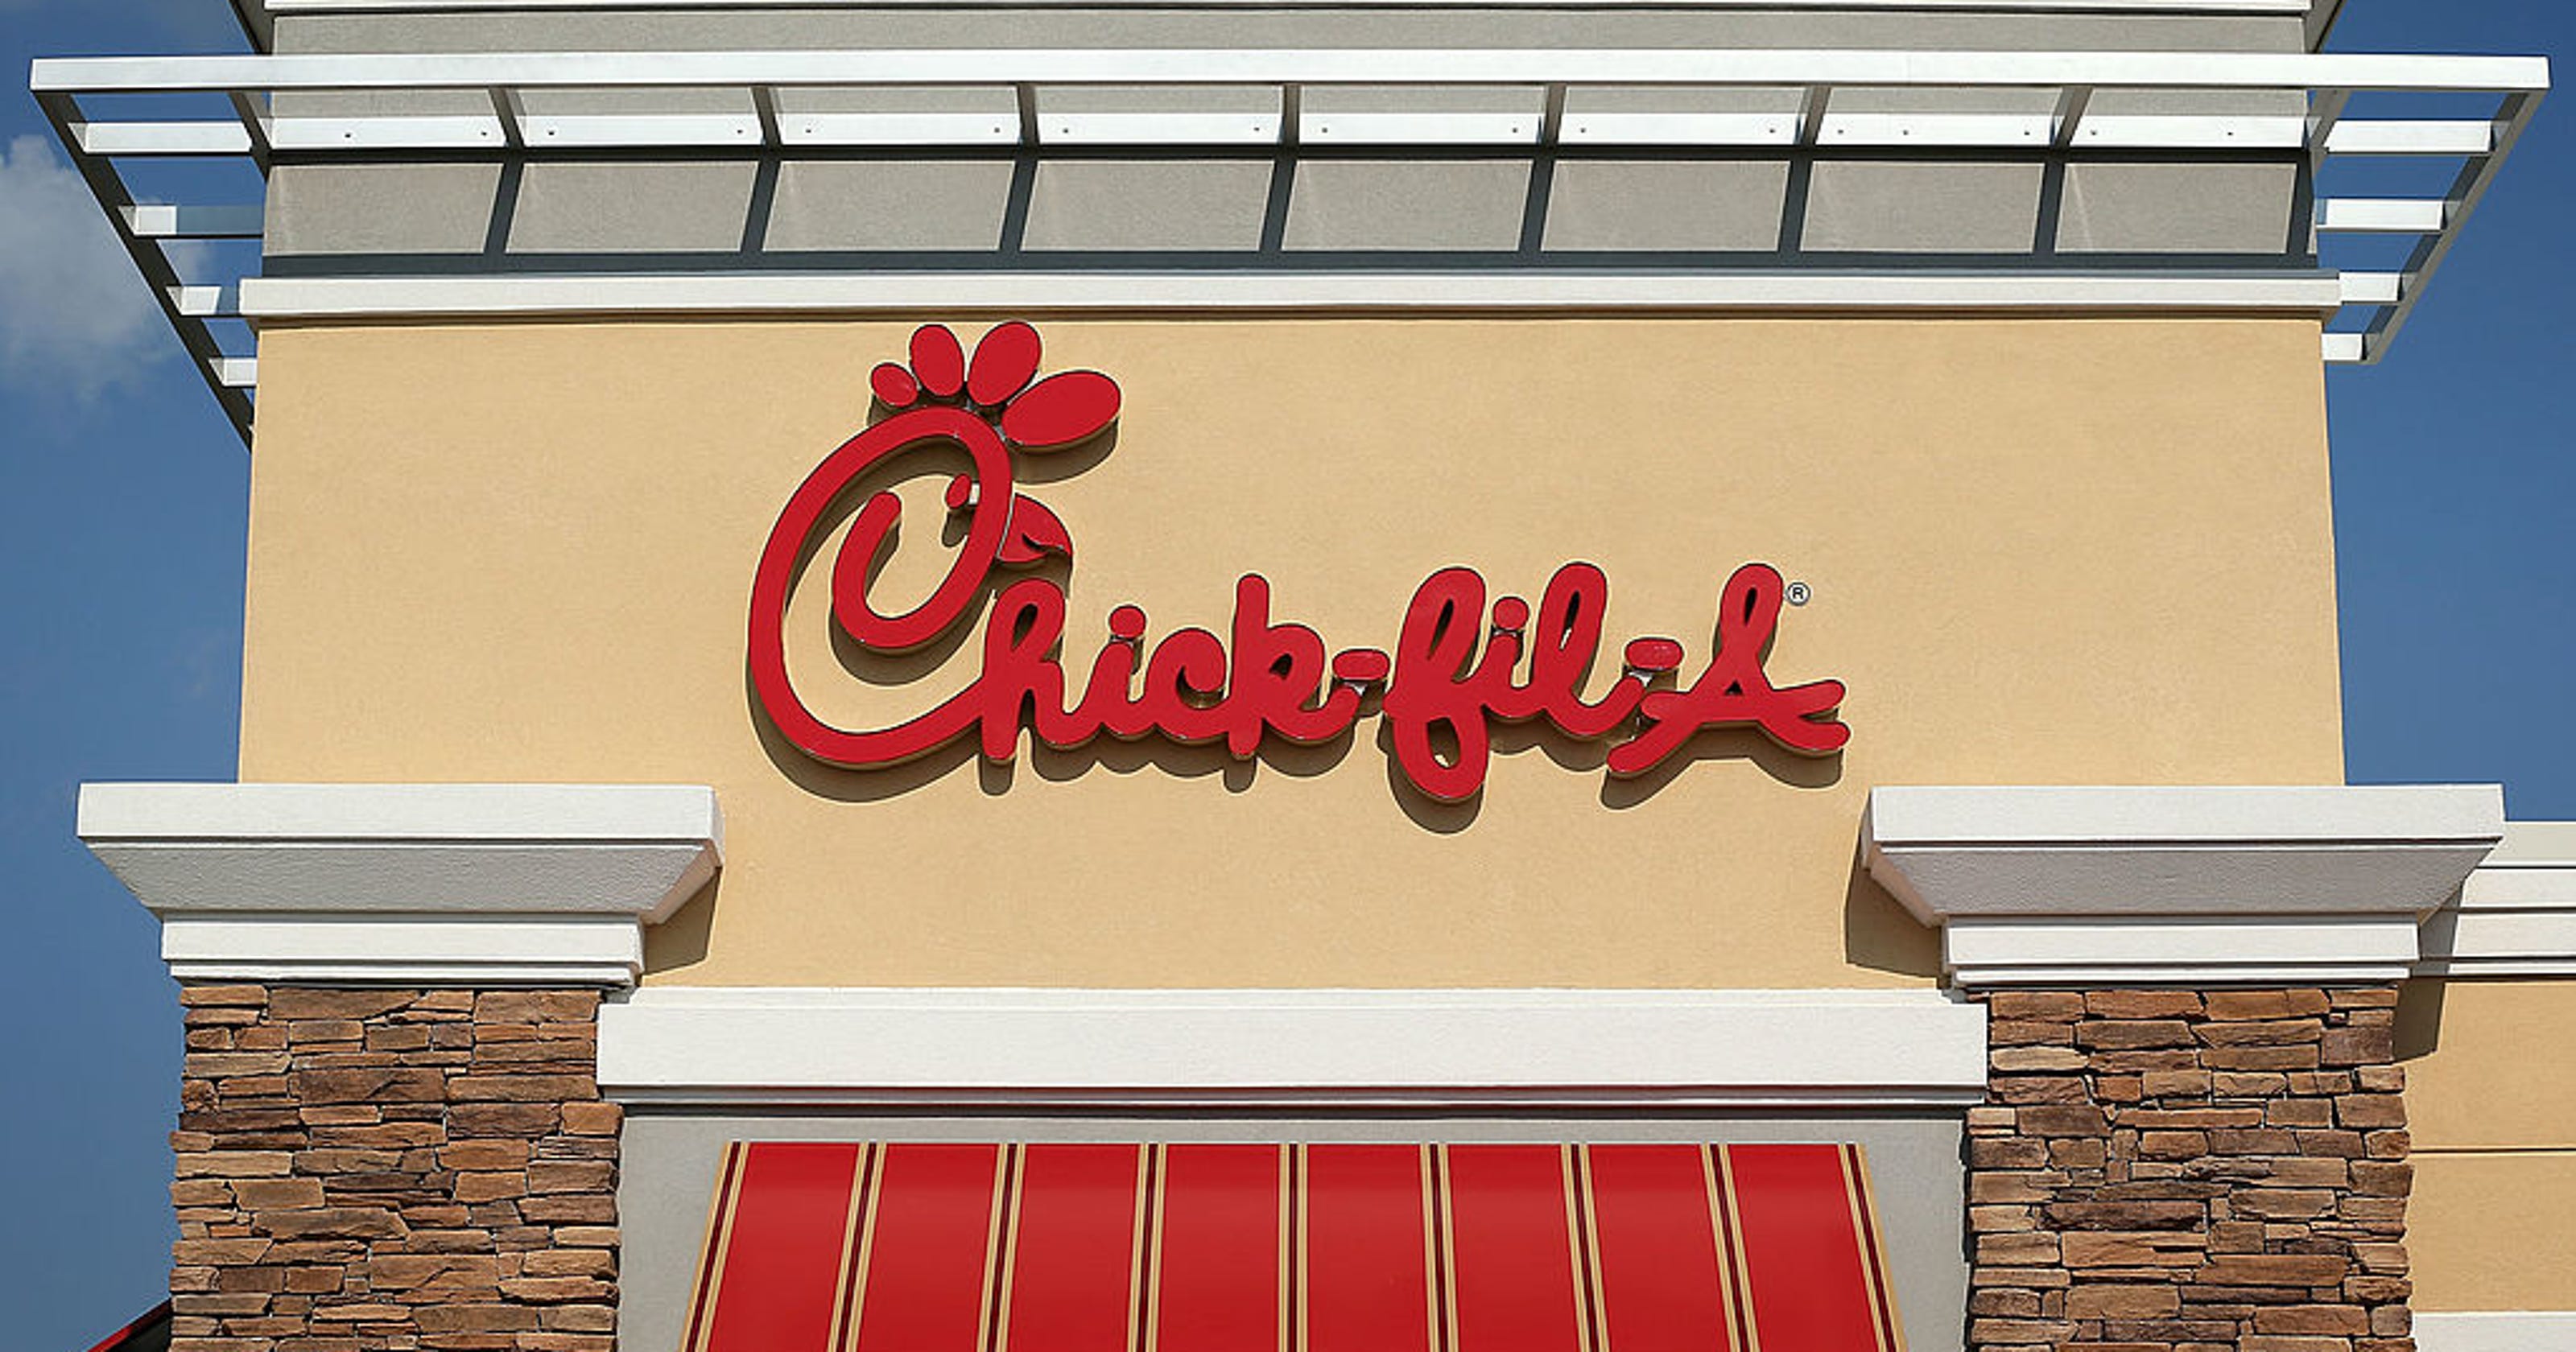 ChickfilA is America's No. 1 fastfood restaurant again